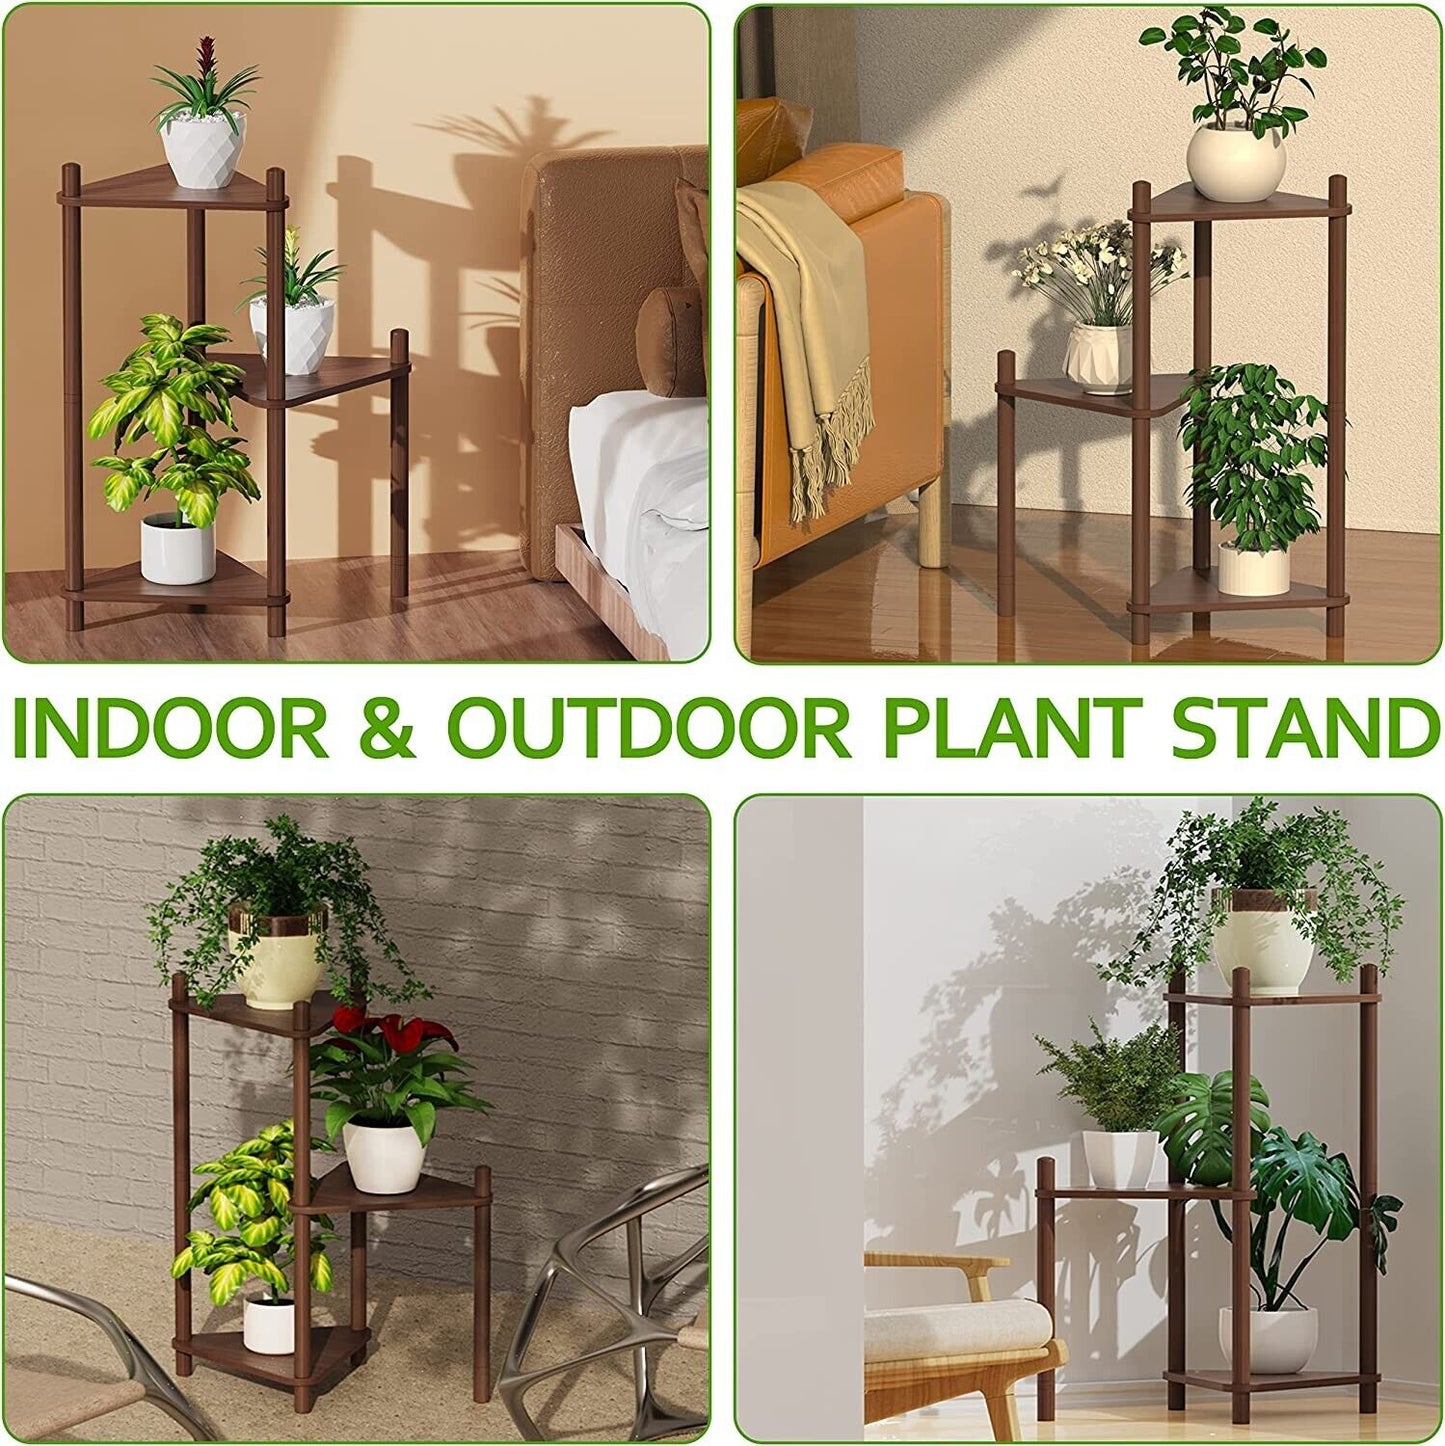 3 Tiers Indoor Plant Stand Bamboo Plant Shelf 26 x 13 x 29.3 Walnut NEW IN BOX